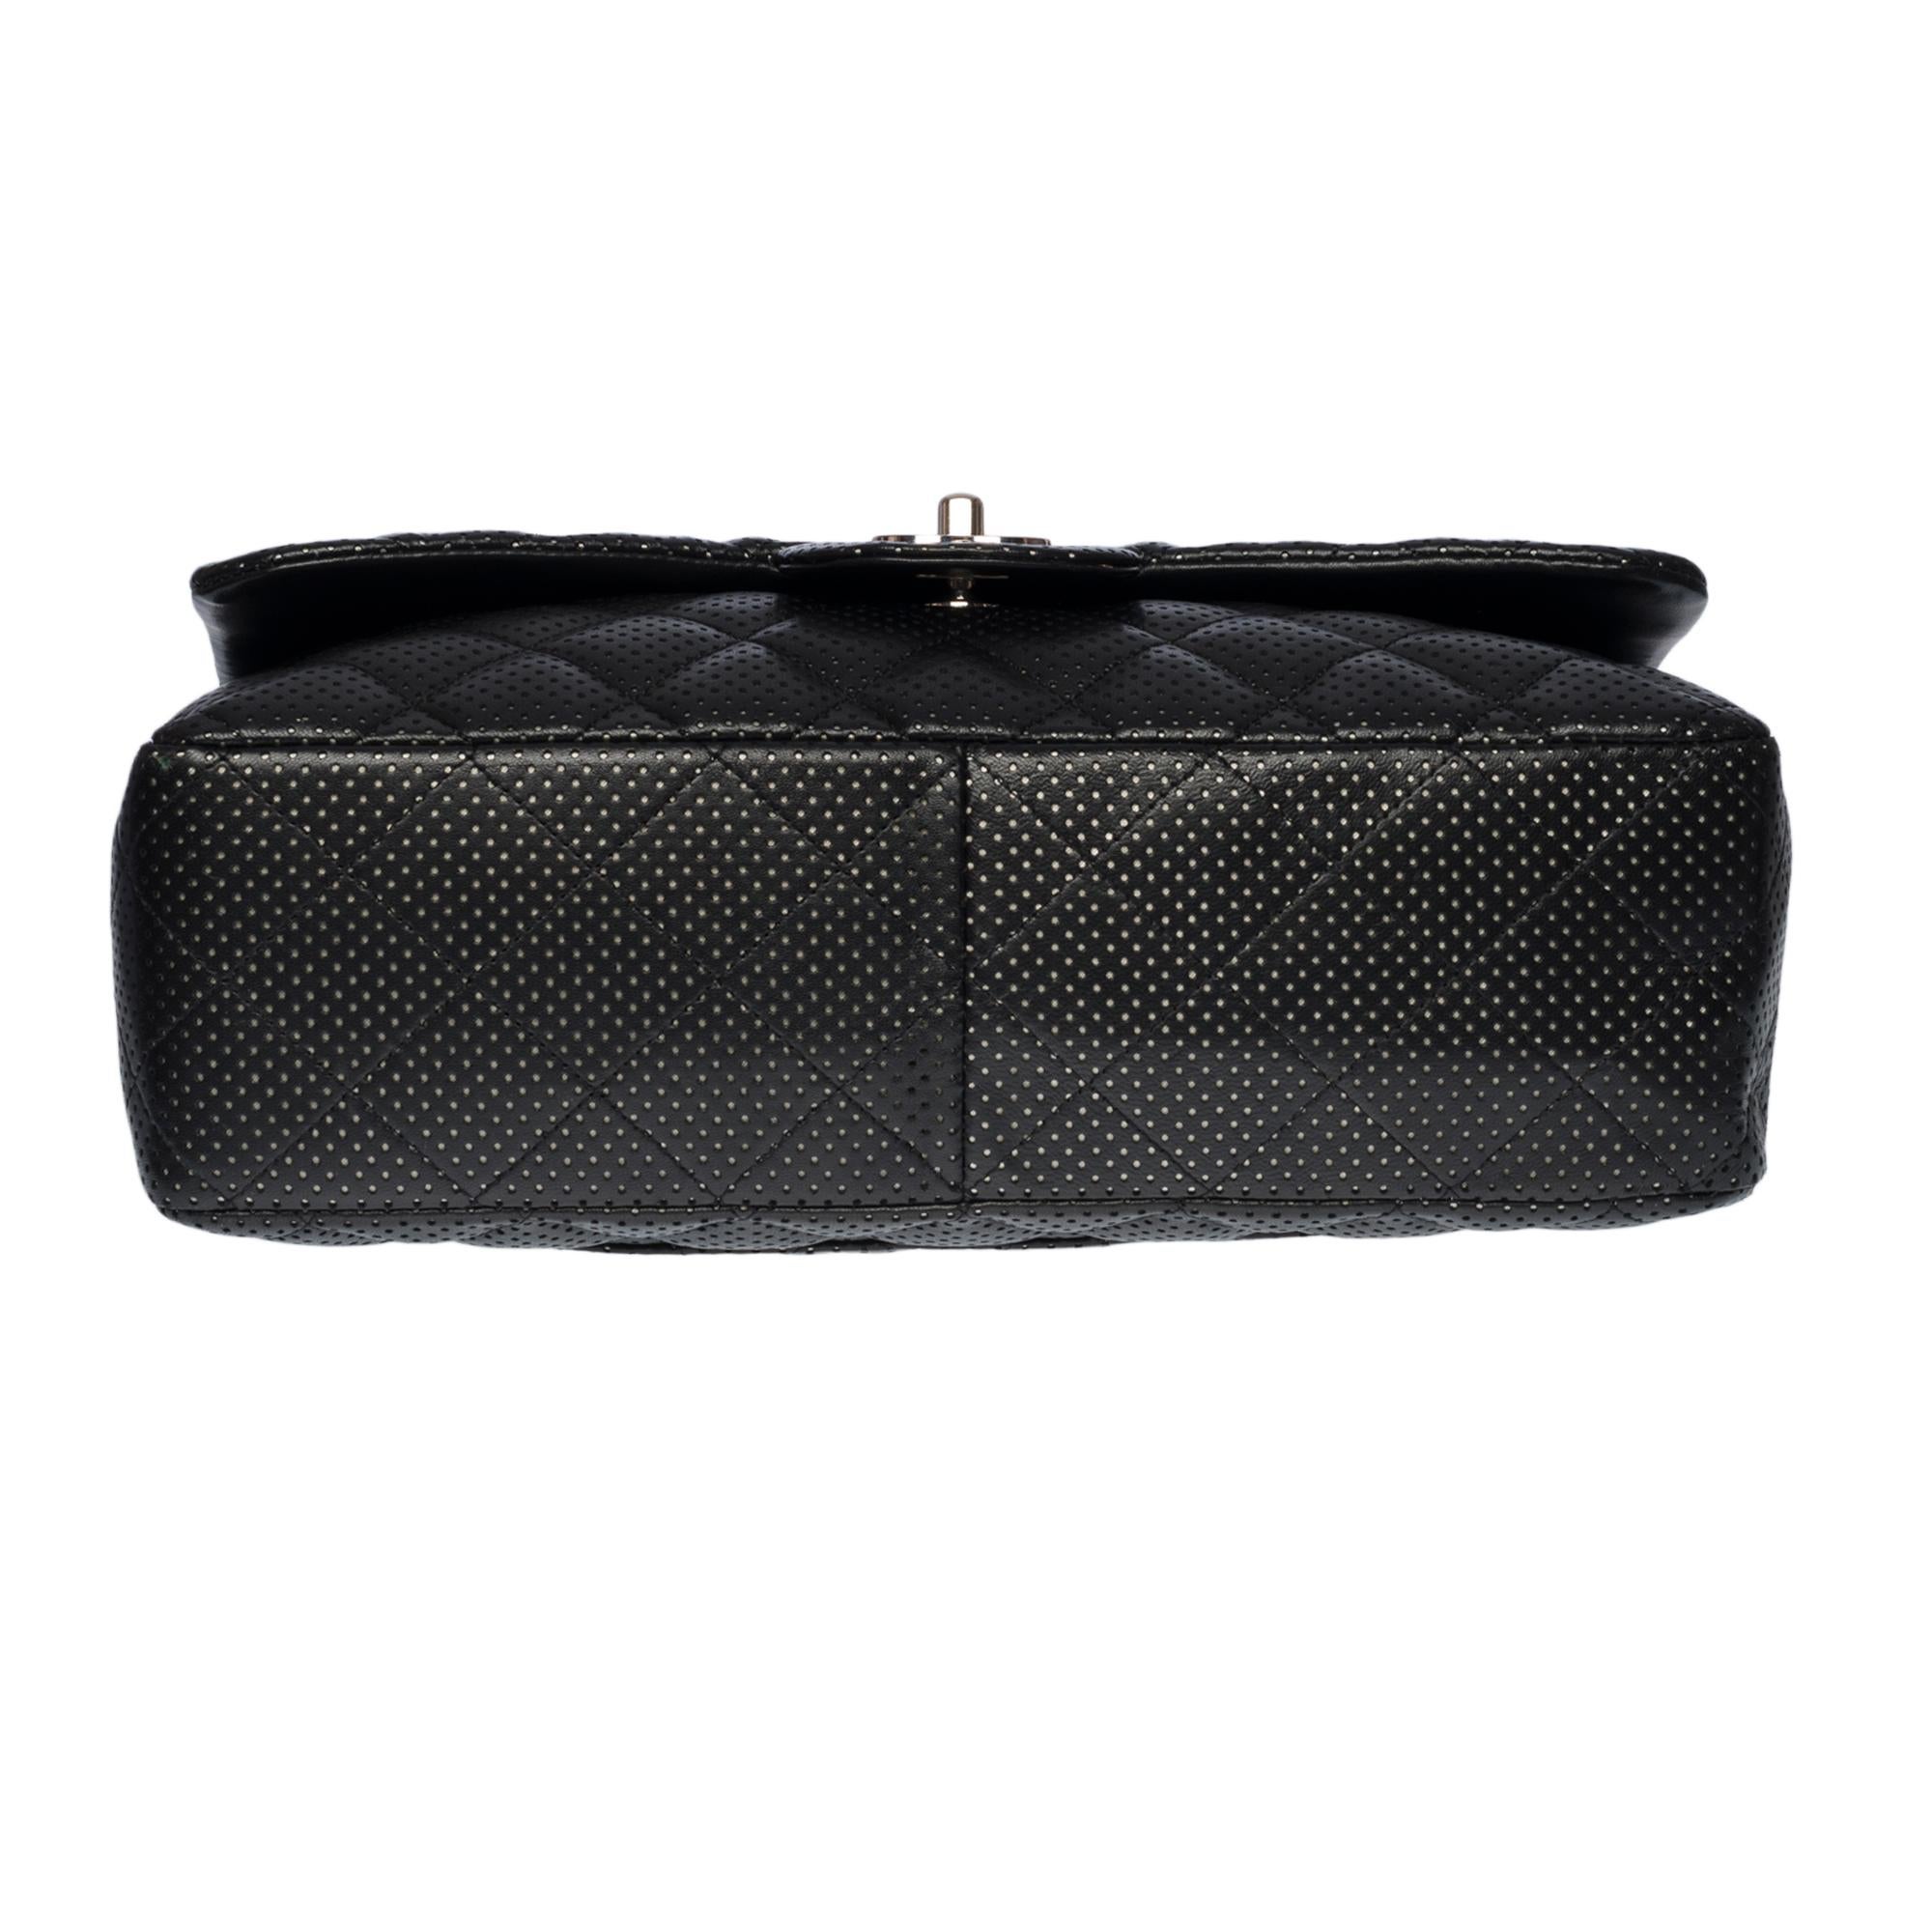 Chanel Timeless Jumbo shoulder Flap bag in black quilted perforated leather, SHW 1